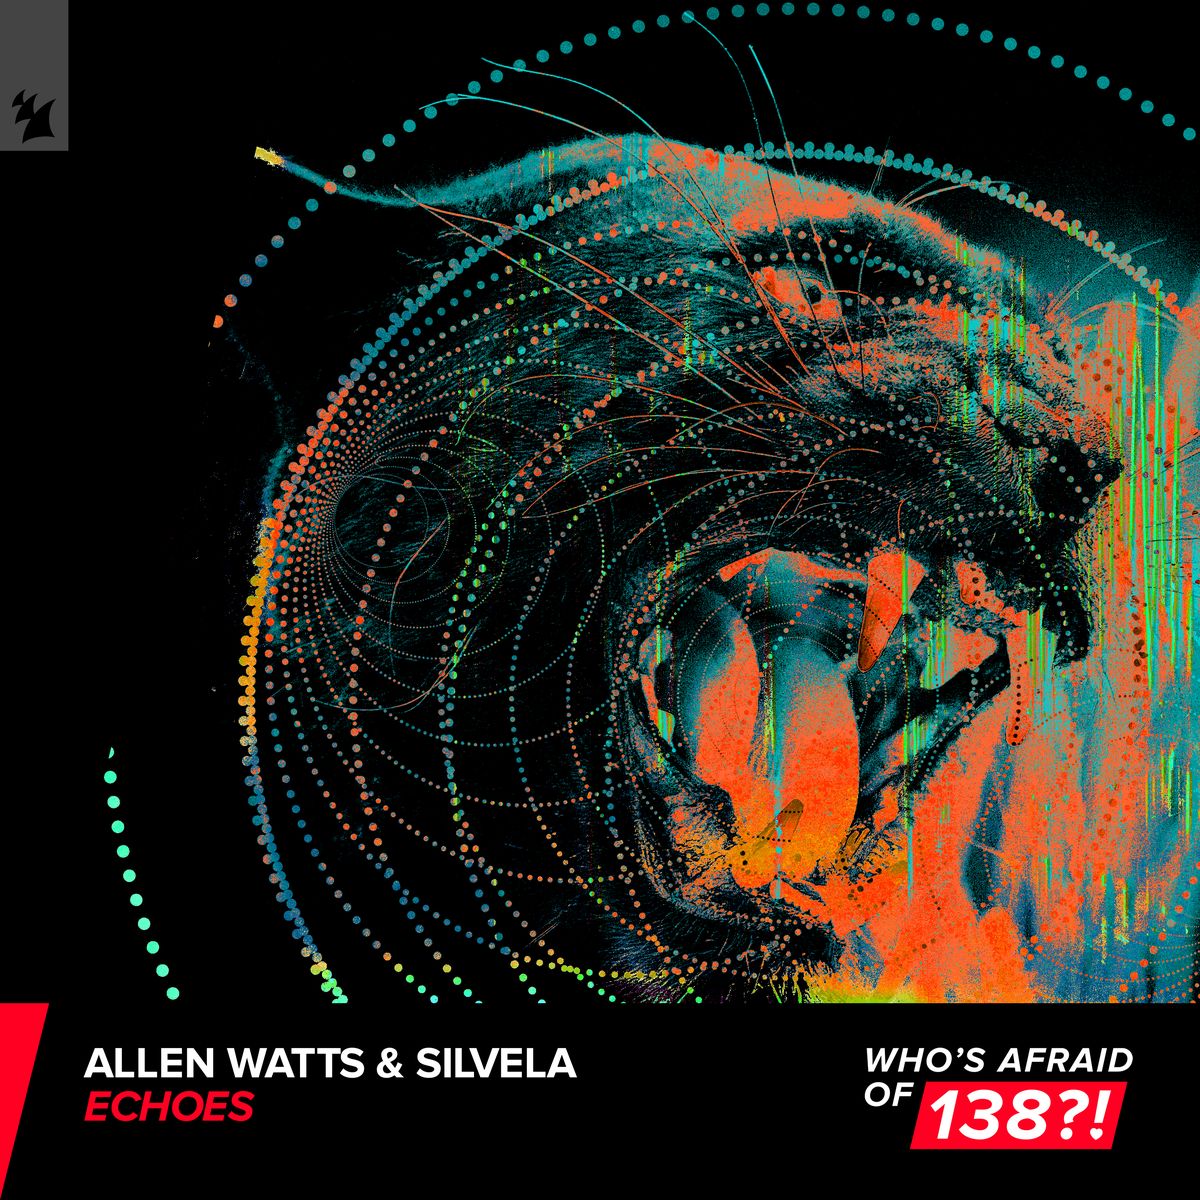 Allen Watts and SILVELA presents Echoes on Who's Afraid Of 138?!